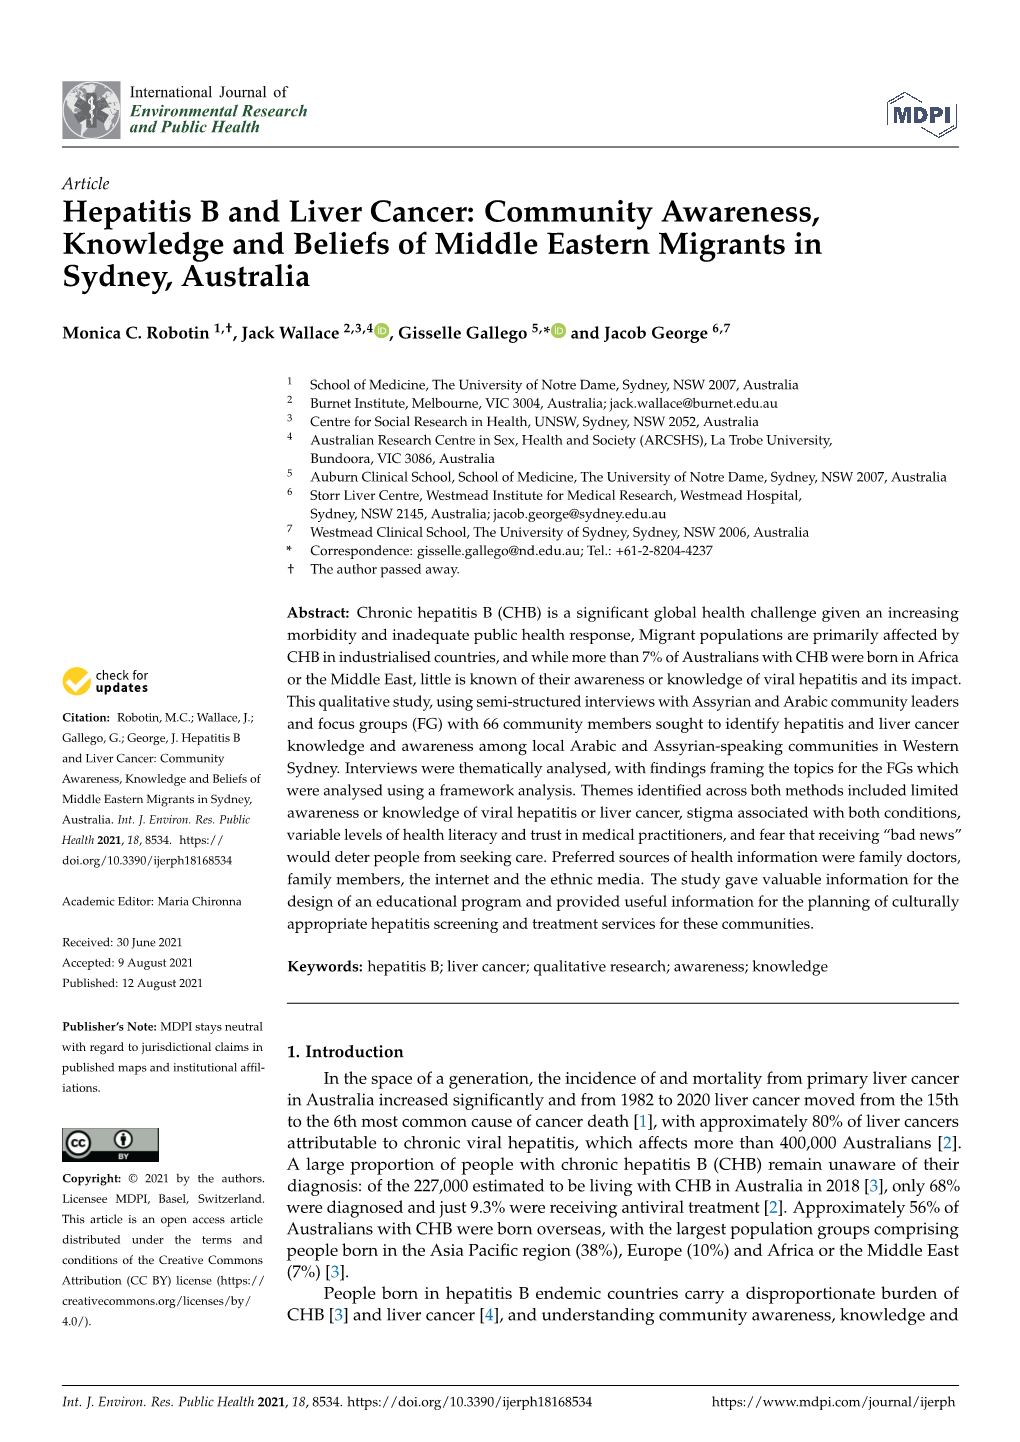 Hepatitis B and Liver Cancer: Community Awareness, Knowledge and Beliefs of Middle Eastern Migrants in Sydney, Australia